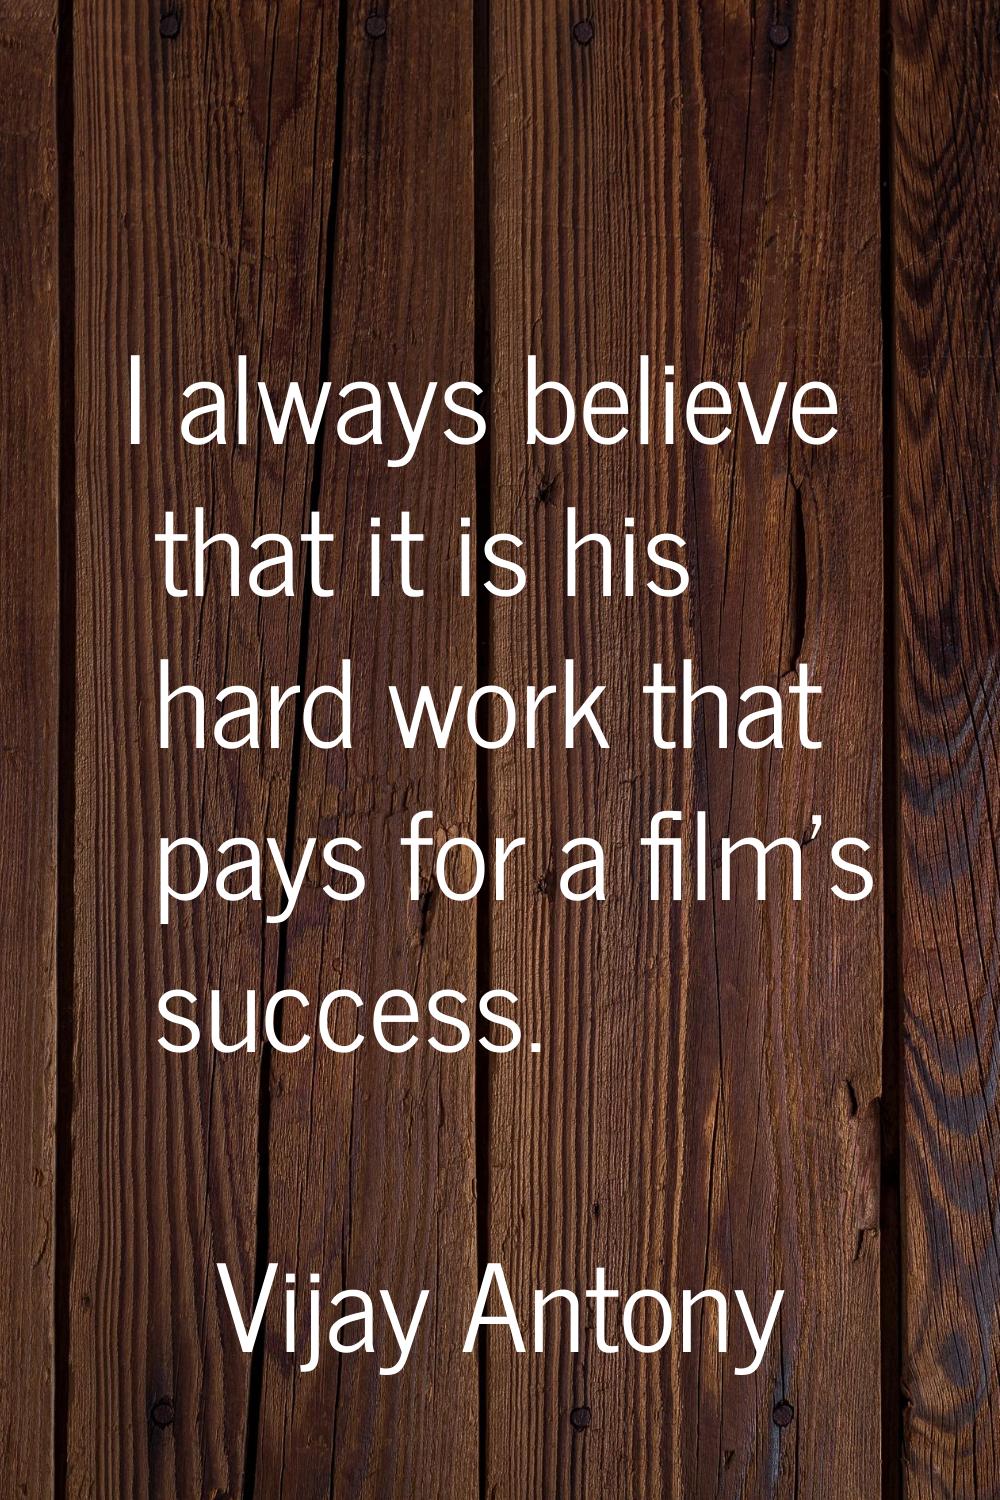 I always believe that it is his hard work that pays for a film's success.